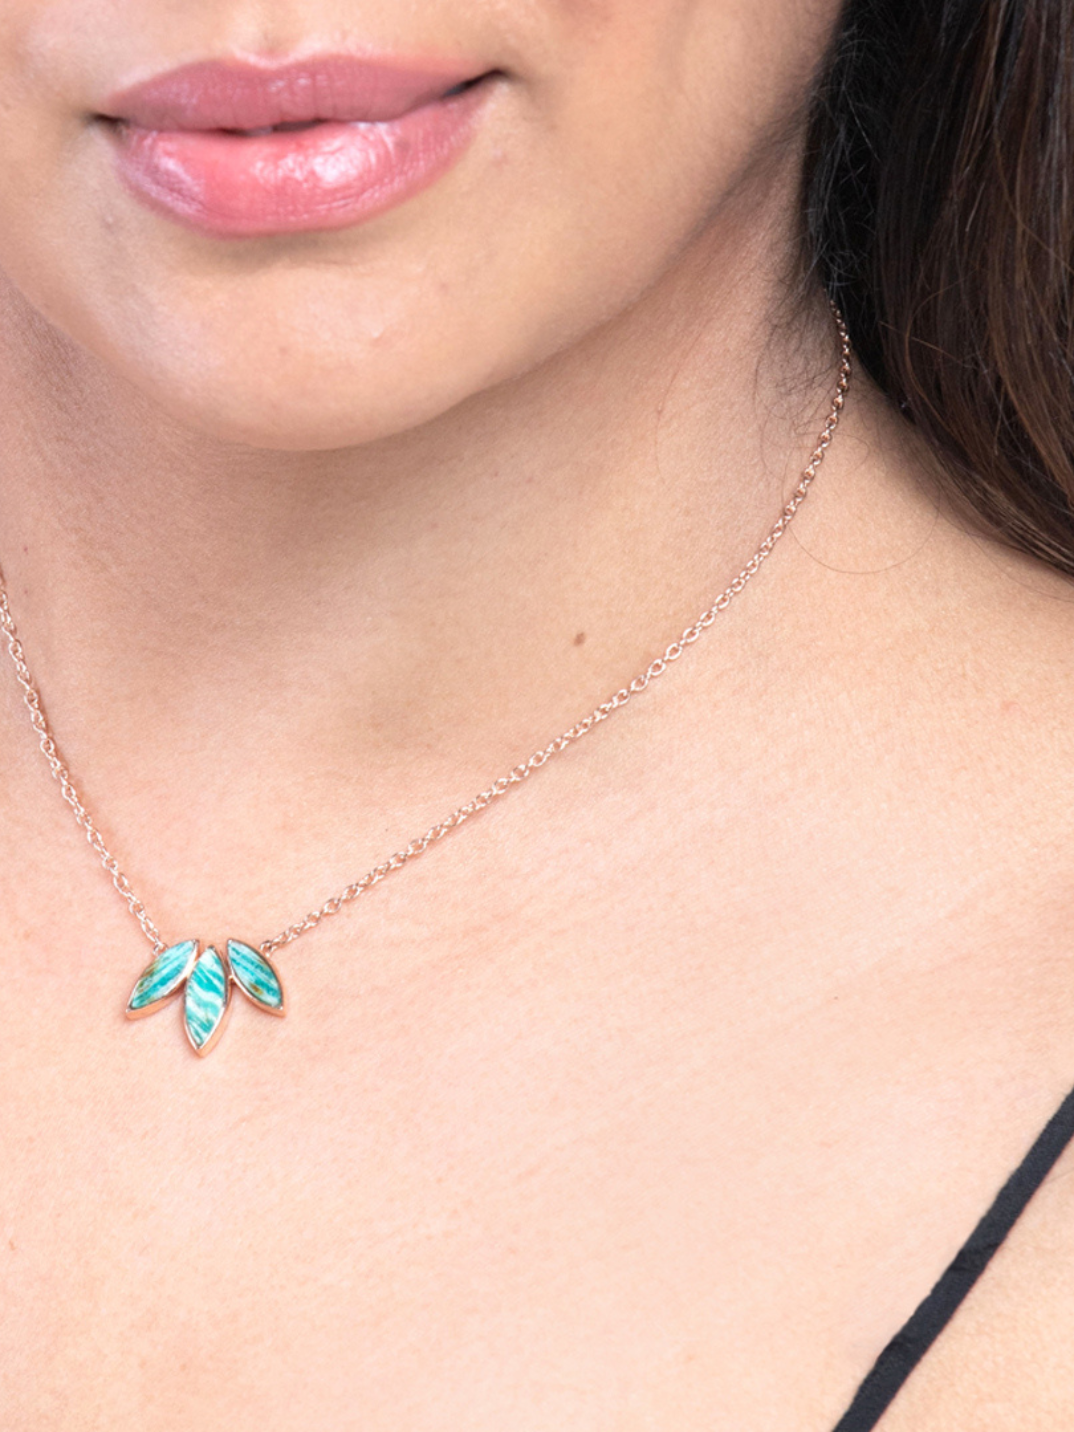 Our Amazonite & Rose gold necklace will bring you closer to nature & add a touch of colour to your outfits. Perfect to pair with florals or neutral colours. Ethically handcrafted jewelry designed in Australia sustainable fashion brand